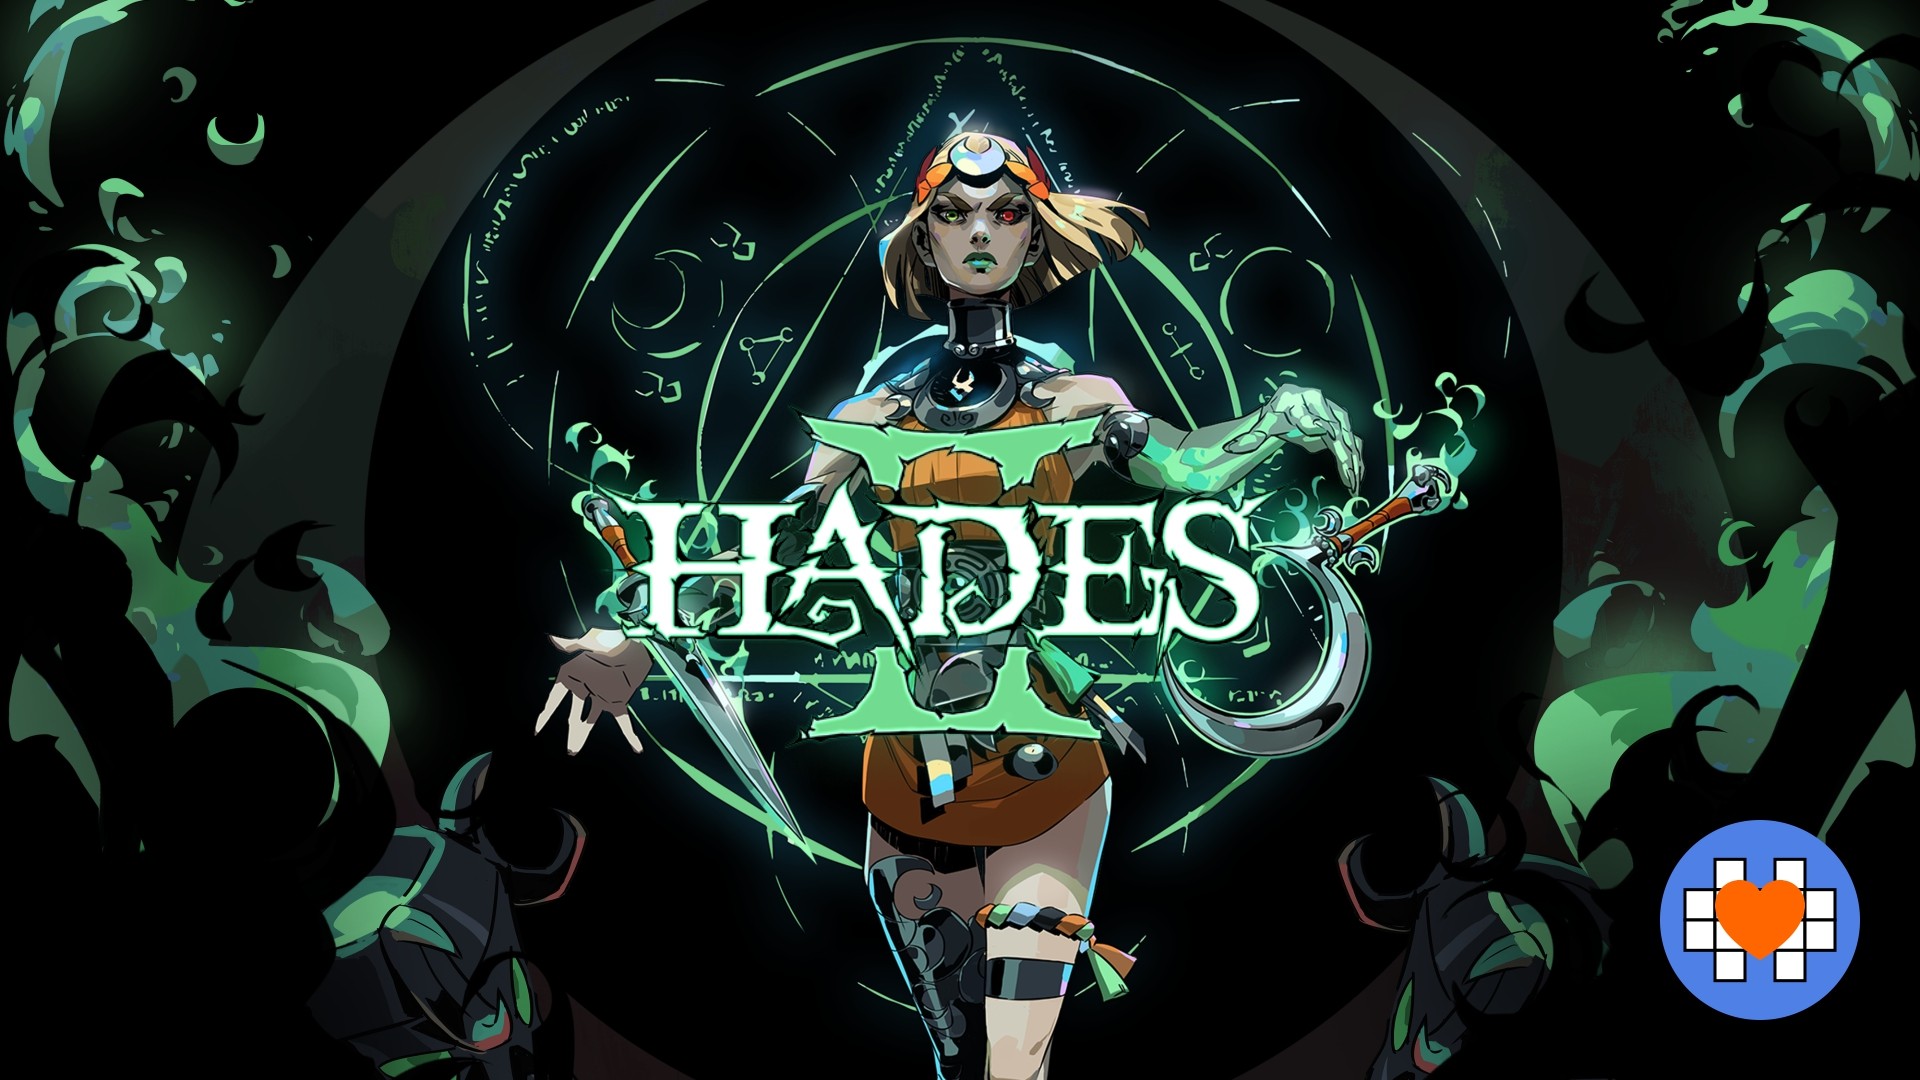 All New Characters Officially Confirmed for Hades II - INDIE GAMES DEVEL